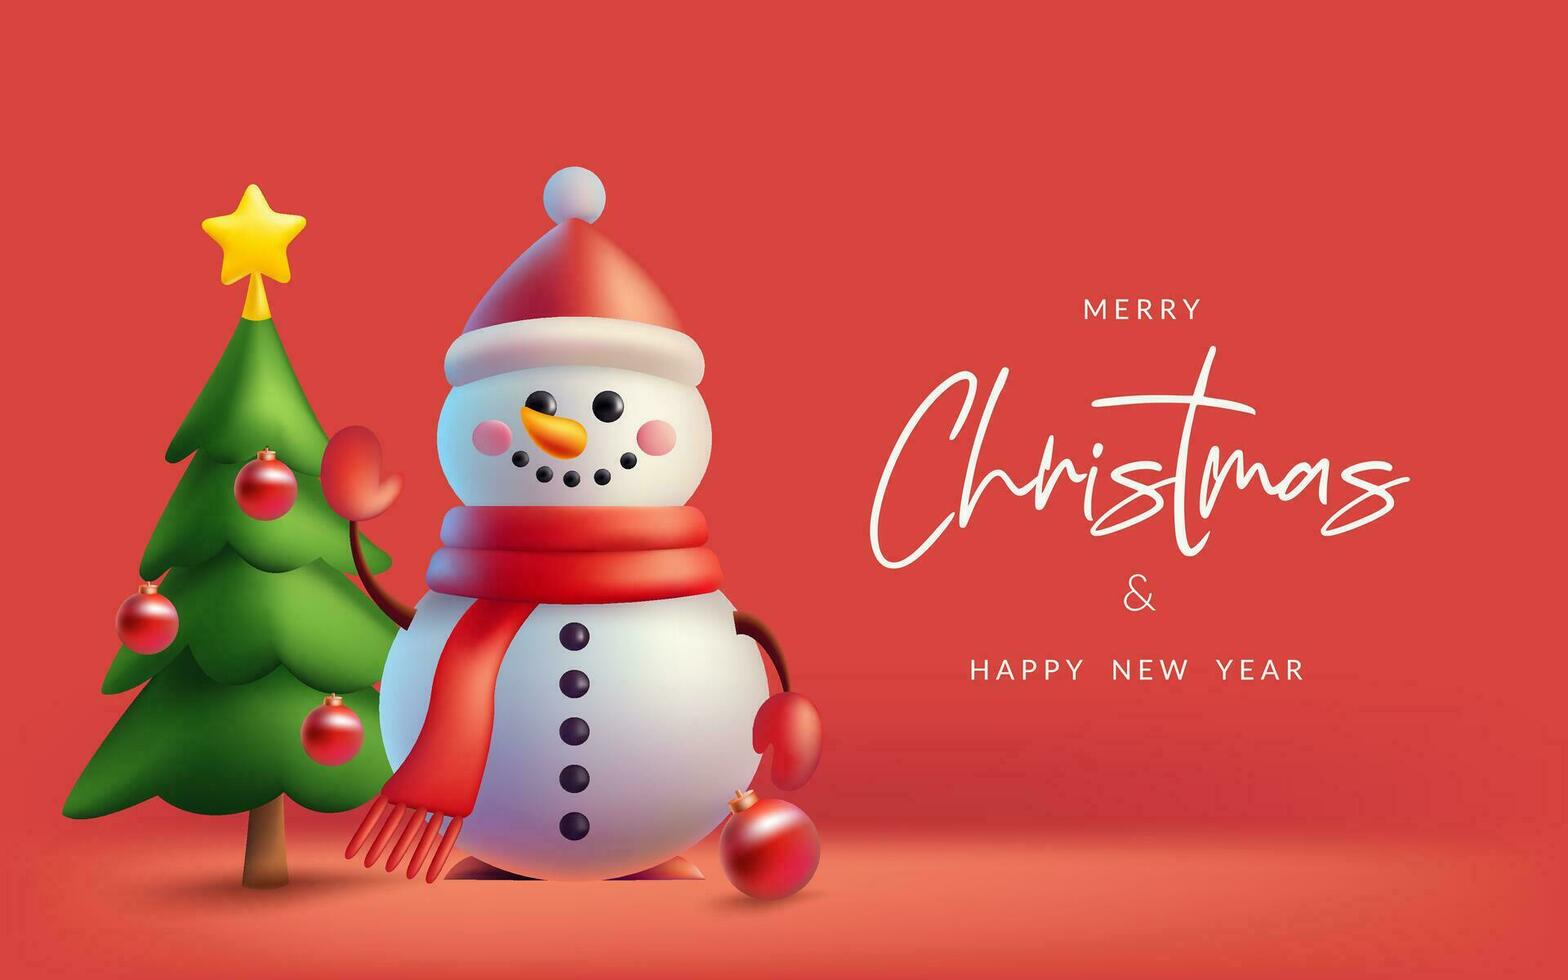 Festive 3D vector illustration of a cute snowman and pine tree for Christmas banner. Holiday design with realistic elements. Not AI generated.